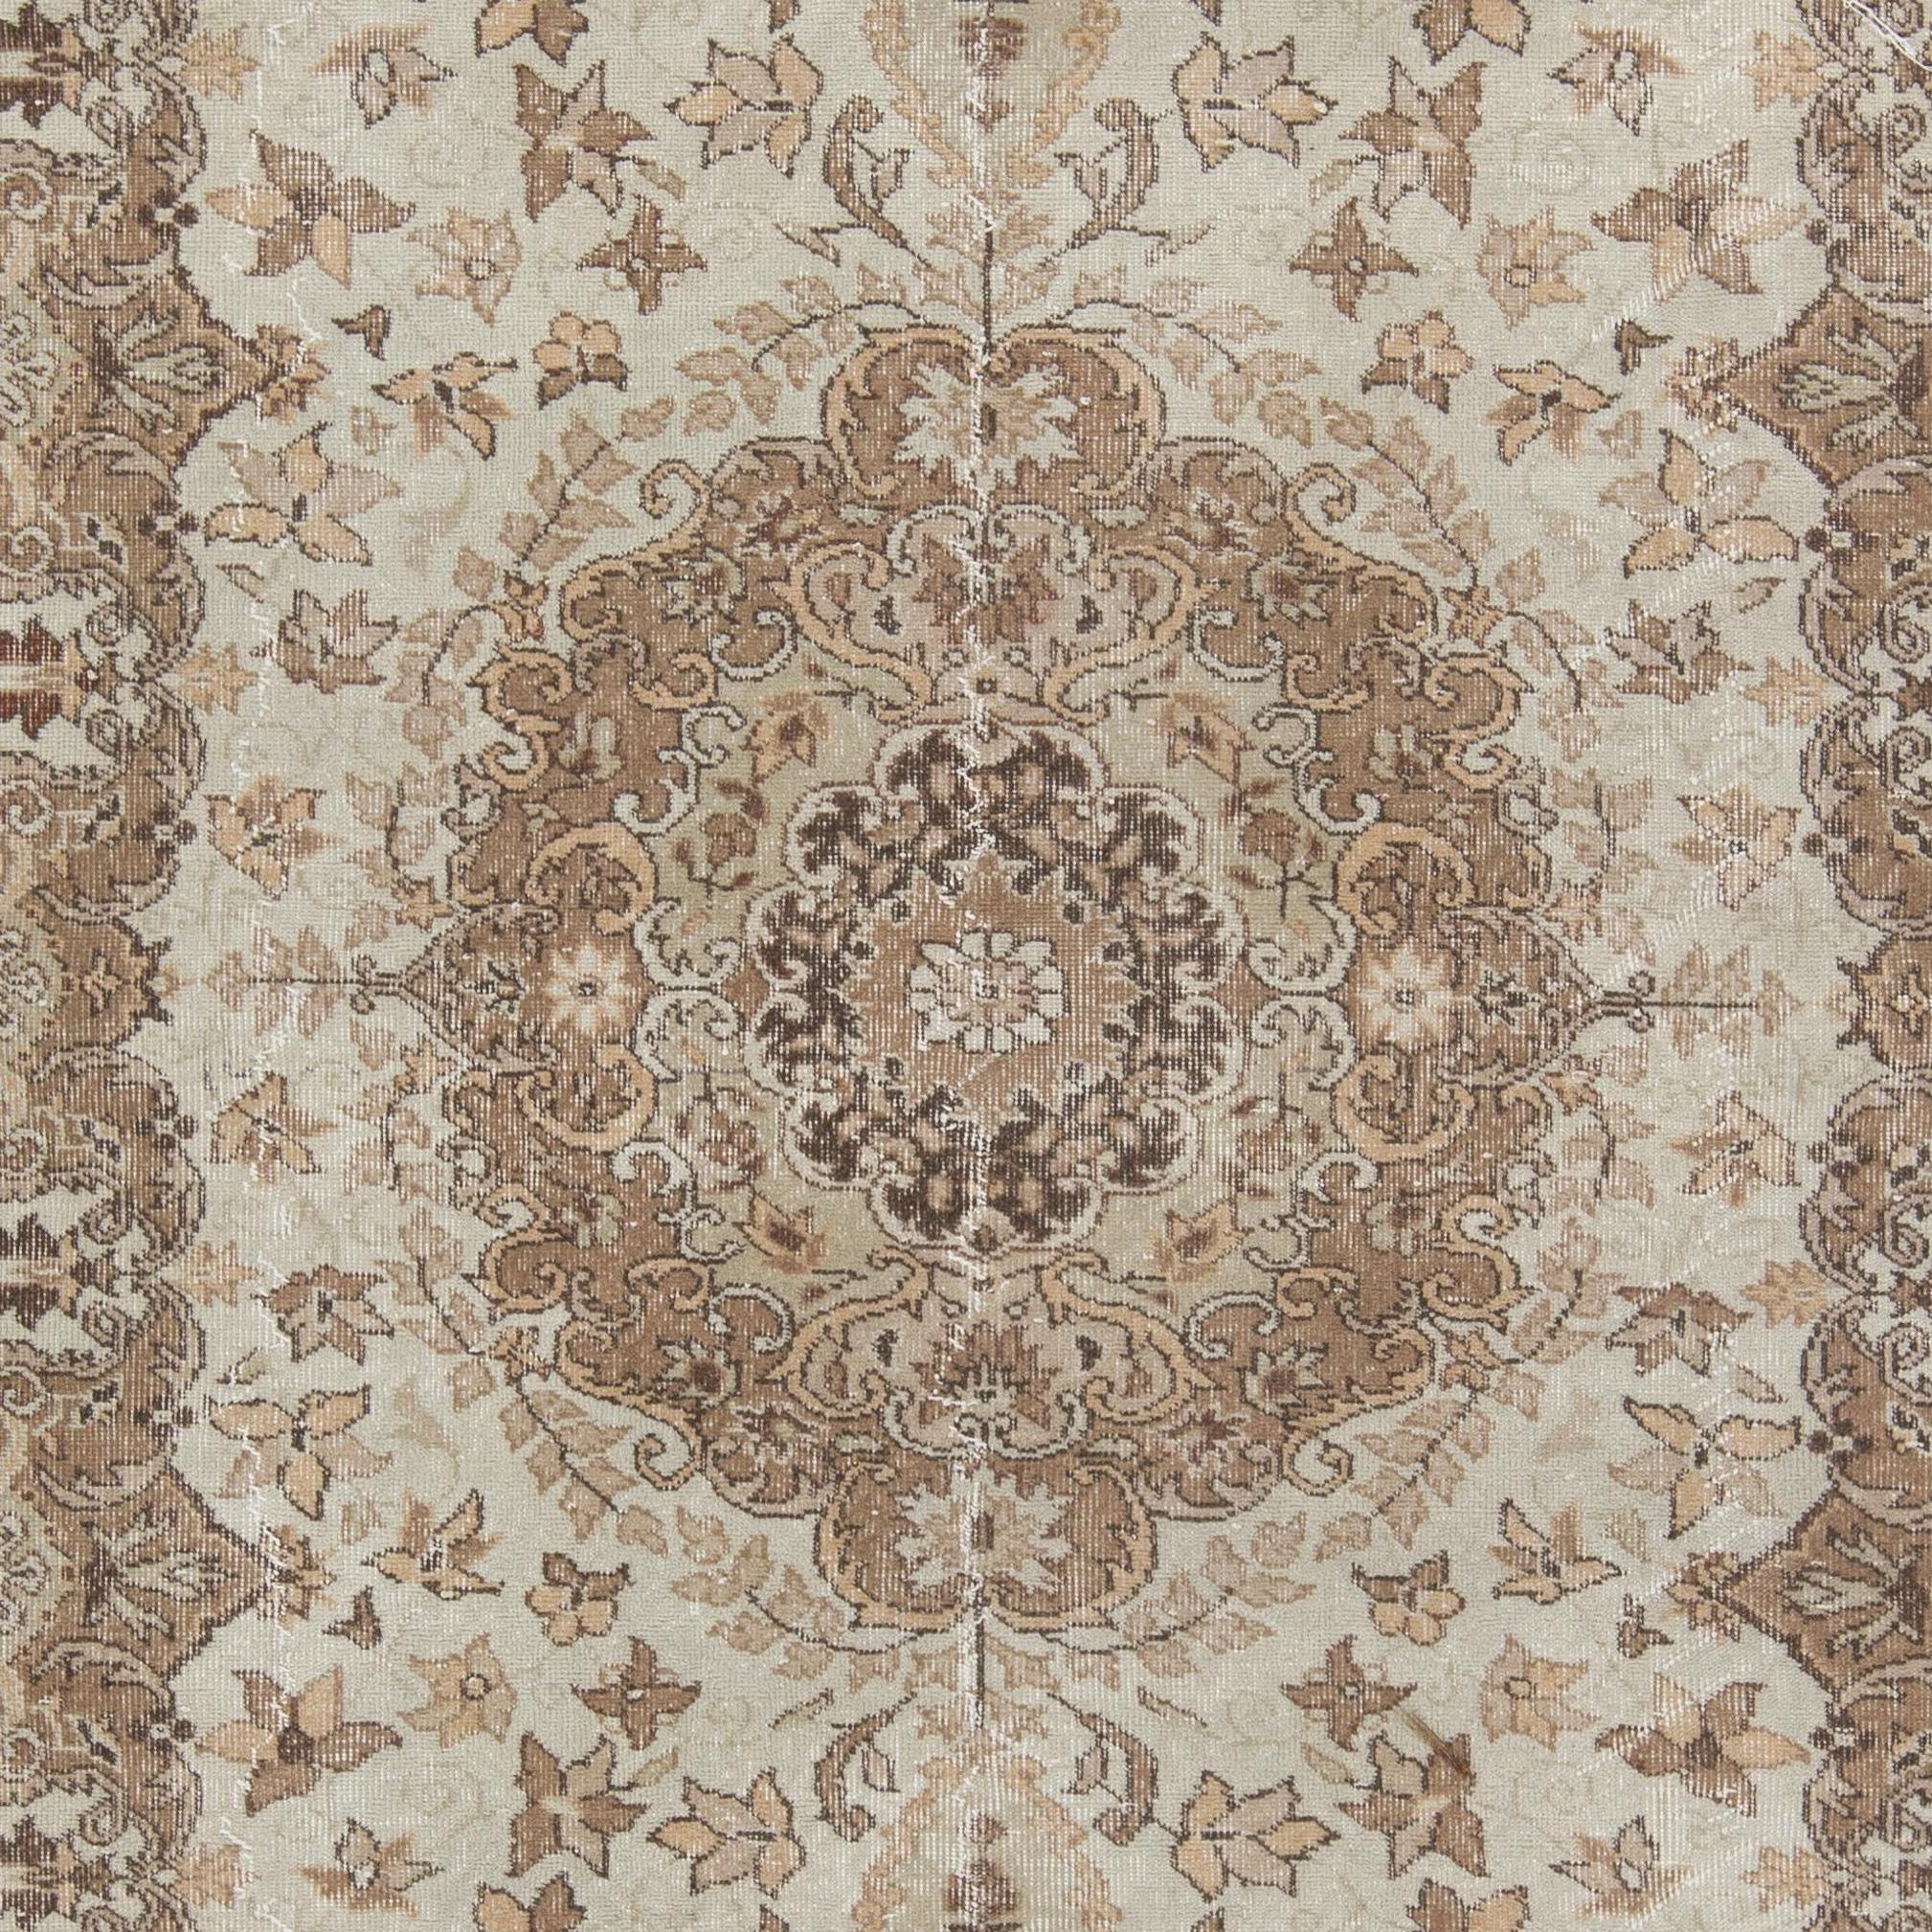 Oushak 7.3x10.5 Ft Mid-20th Century Handmade Shabby Chic Turkish Wool Area Rug in Beige For Sale